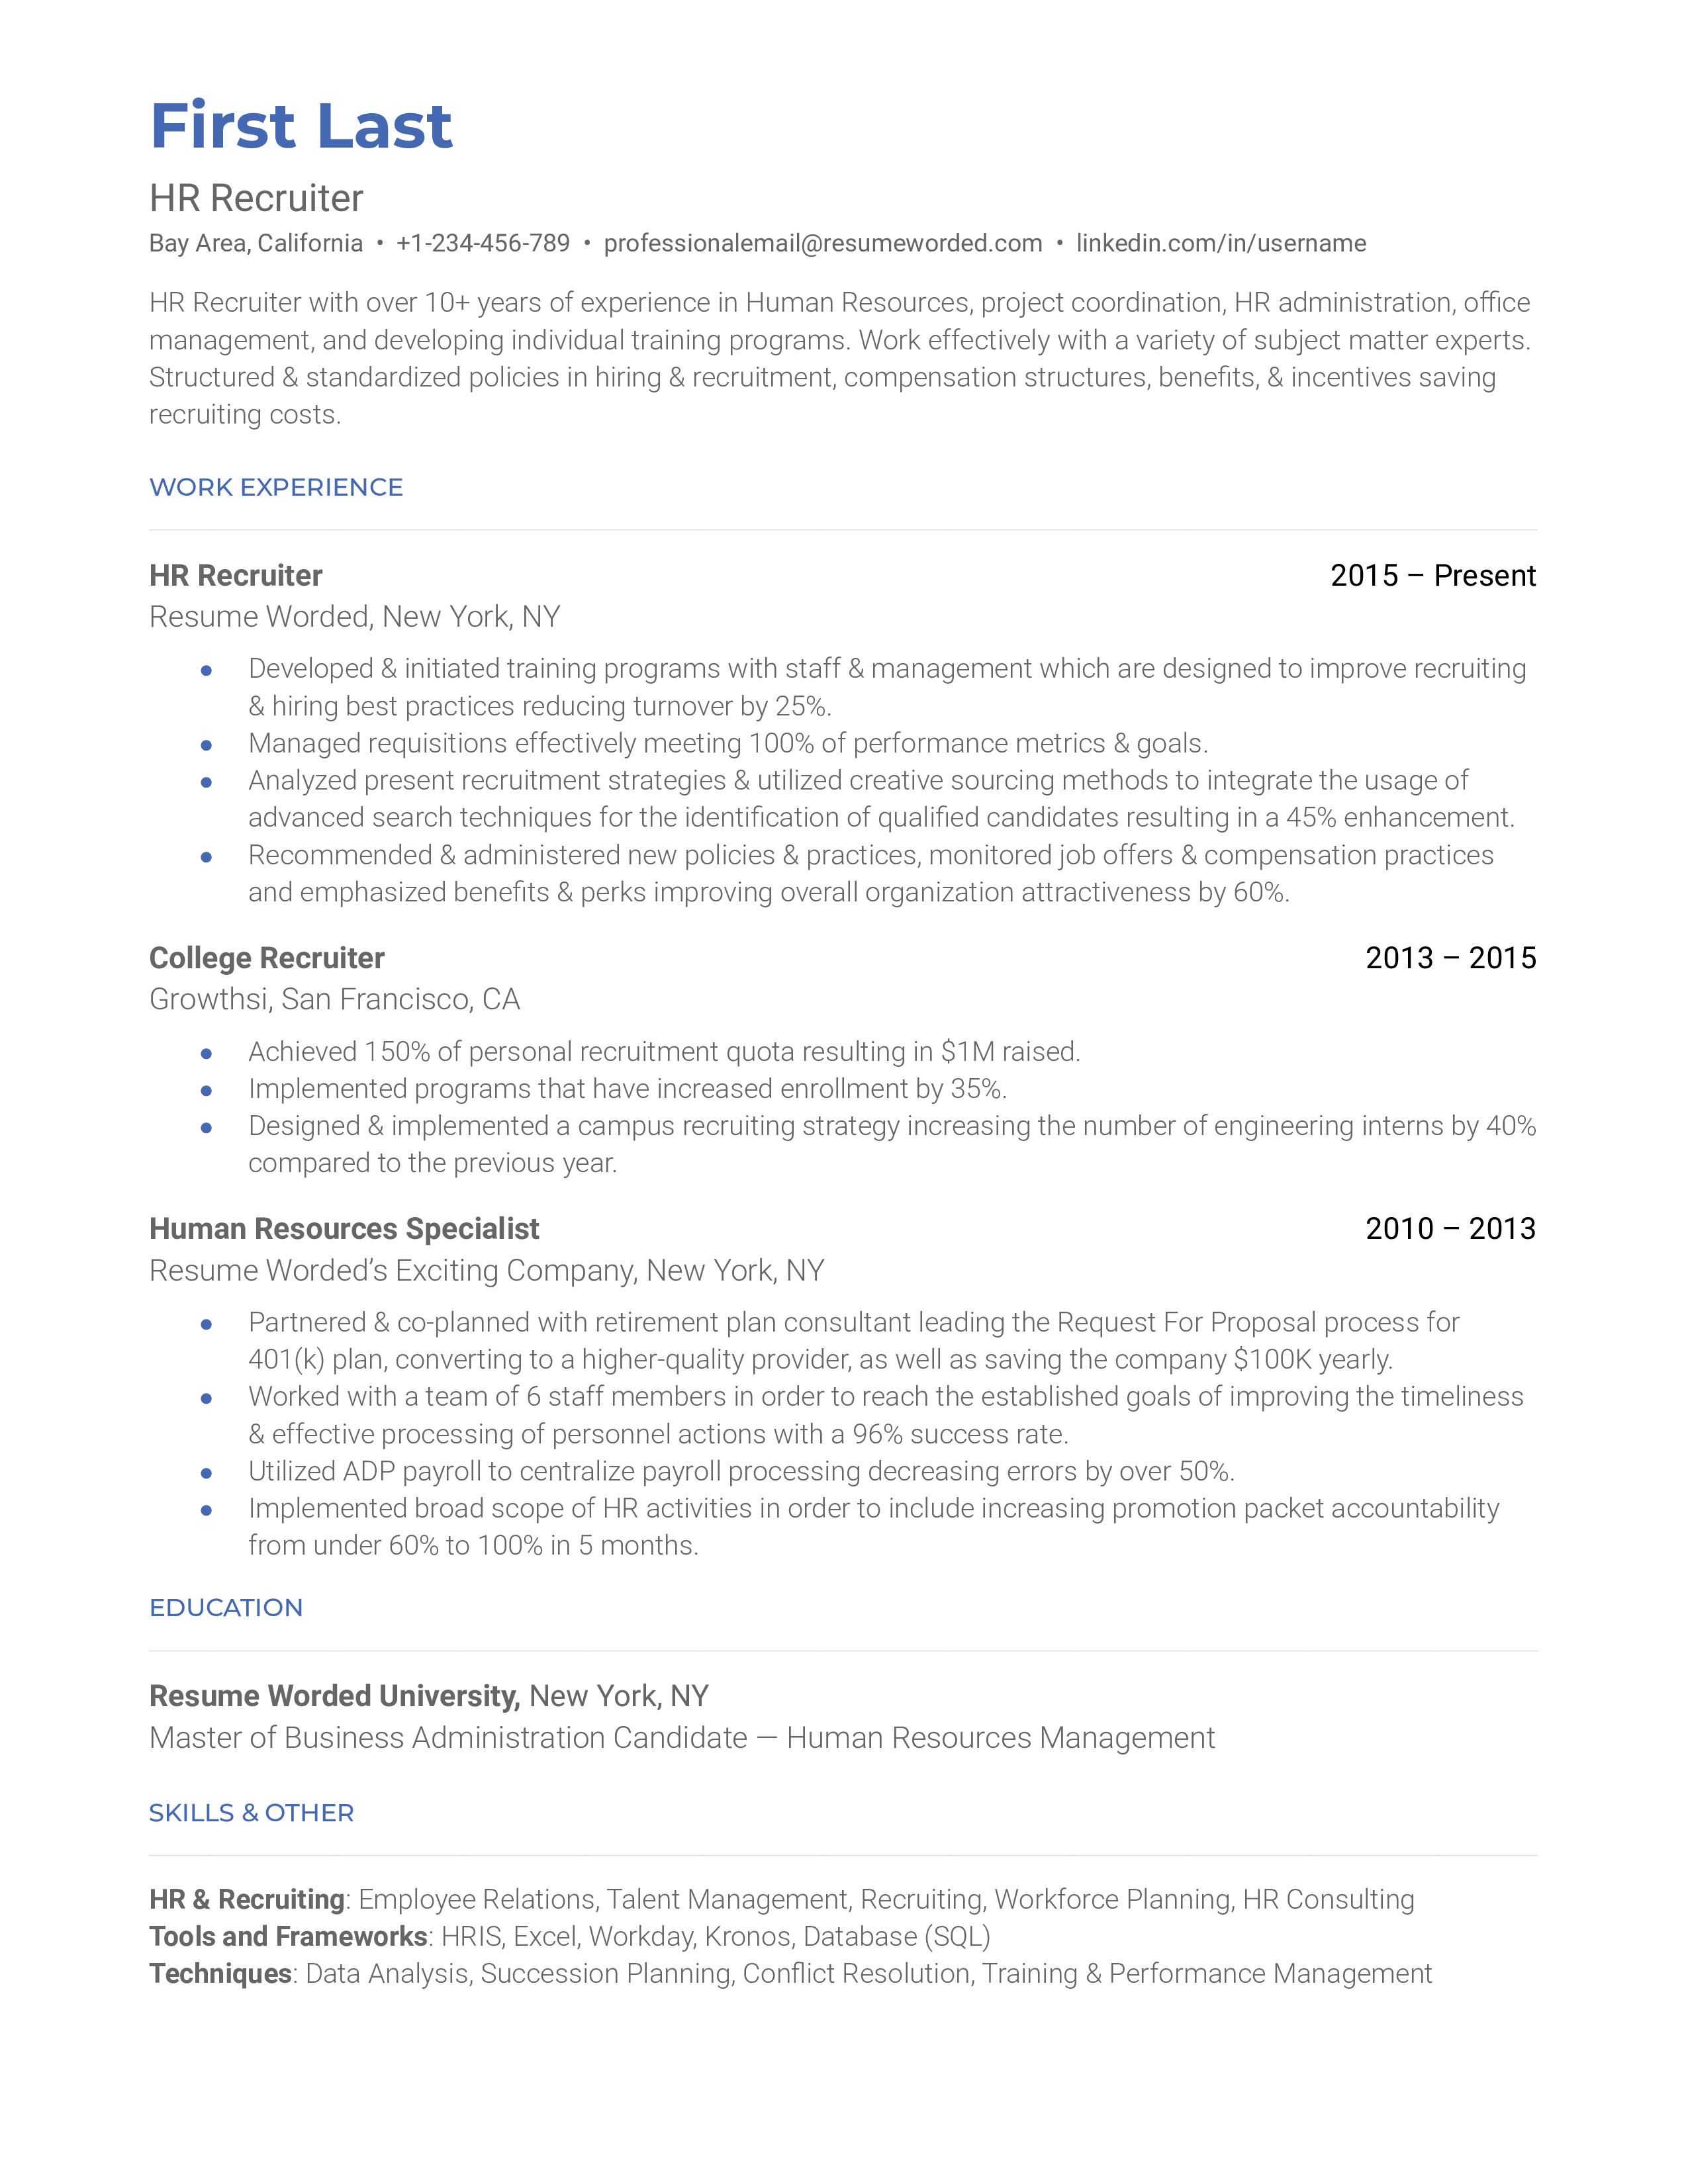 A HR recruiter sample resume that highlights the applicant's career progression and educational history.